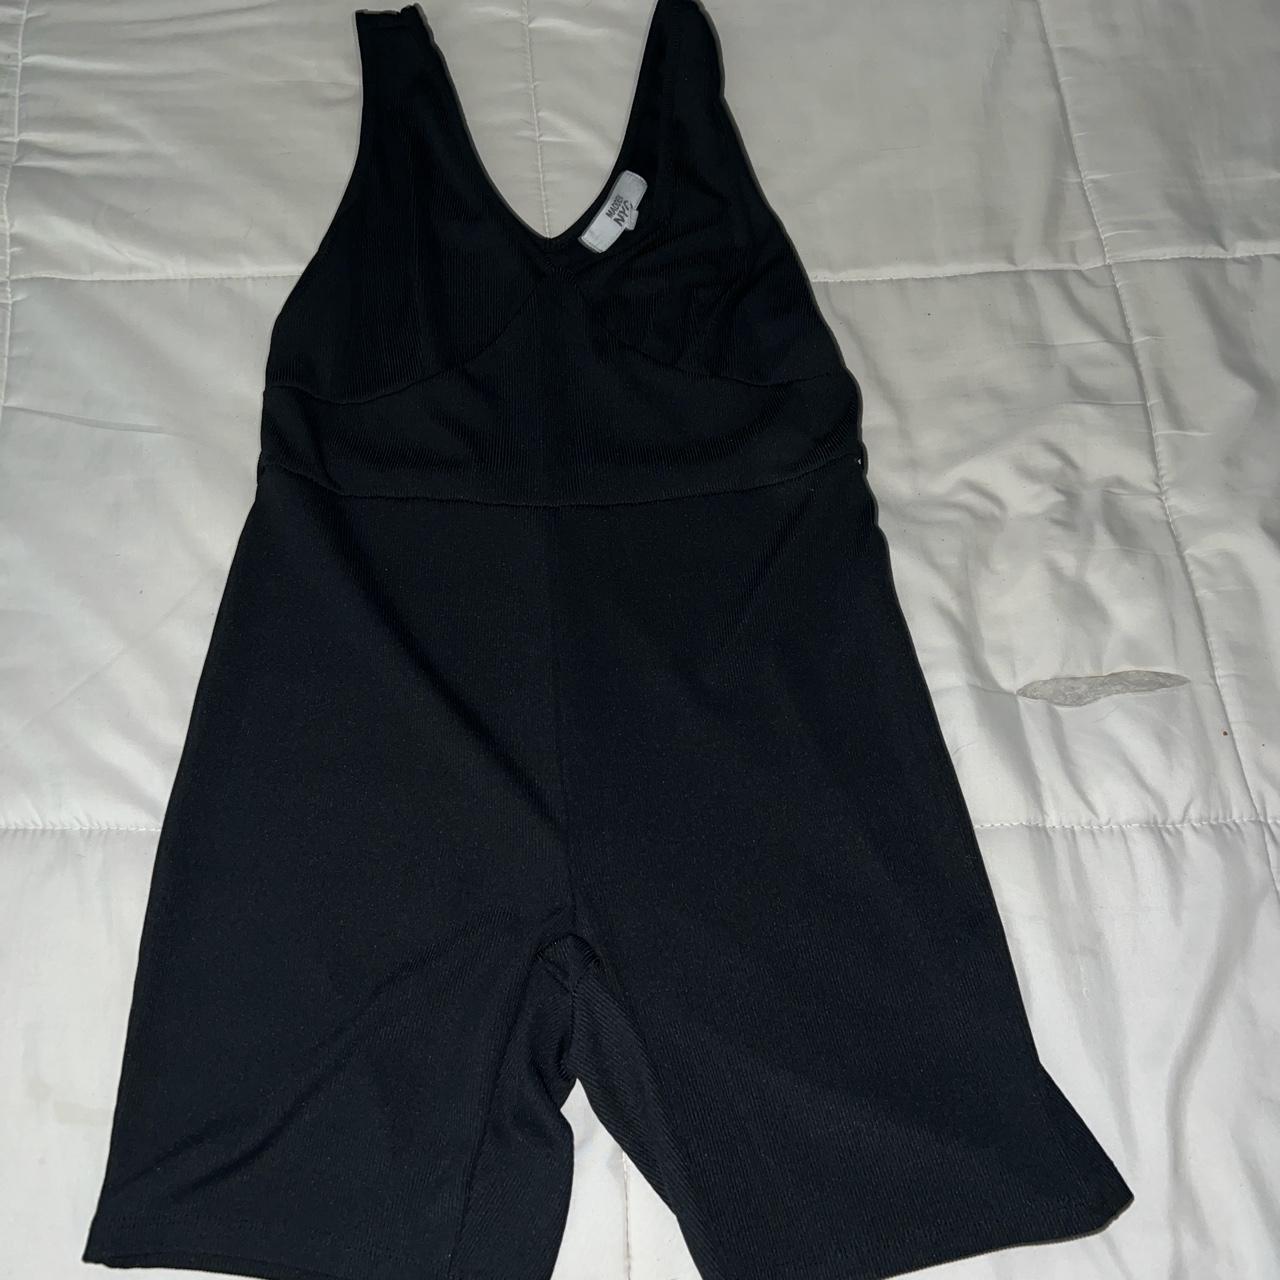 MADDEN NYC jump suit - Depop